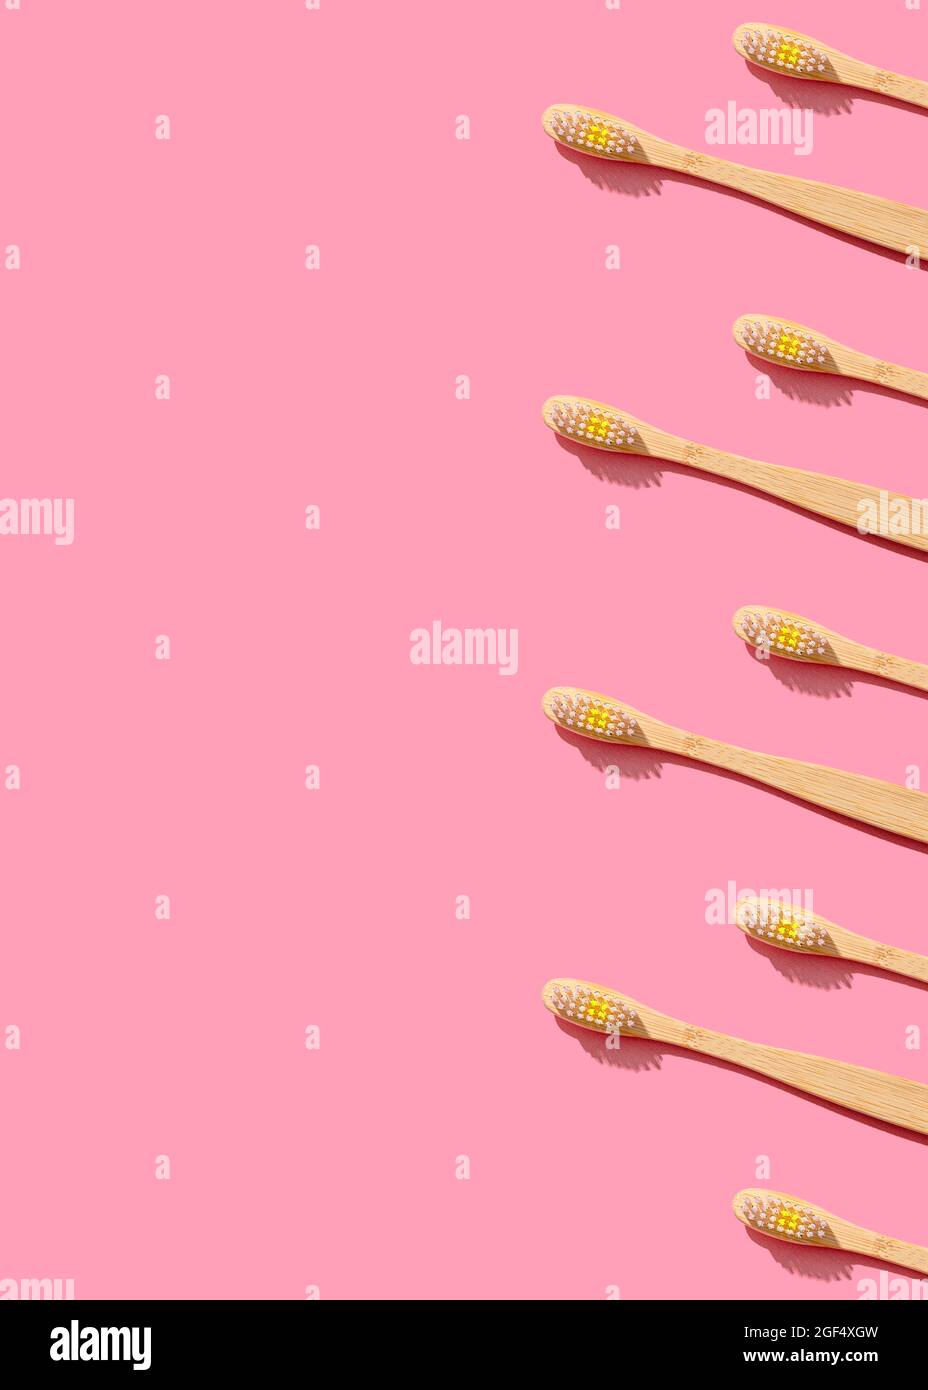 Pattern of wooden toothbrushes flat laid against pink background Stock Photo